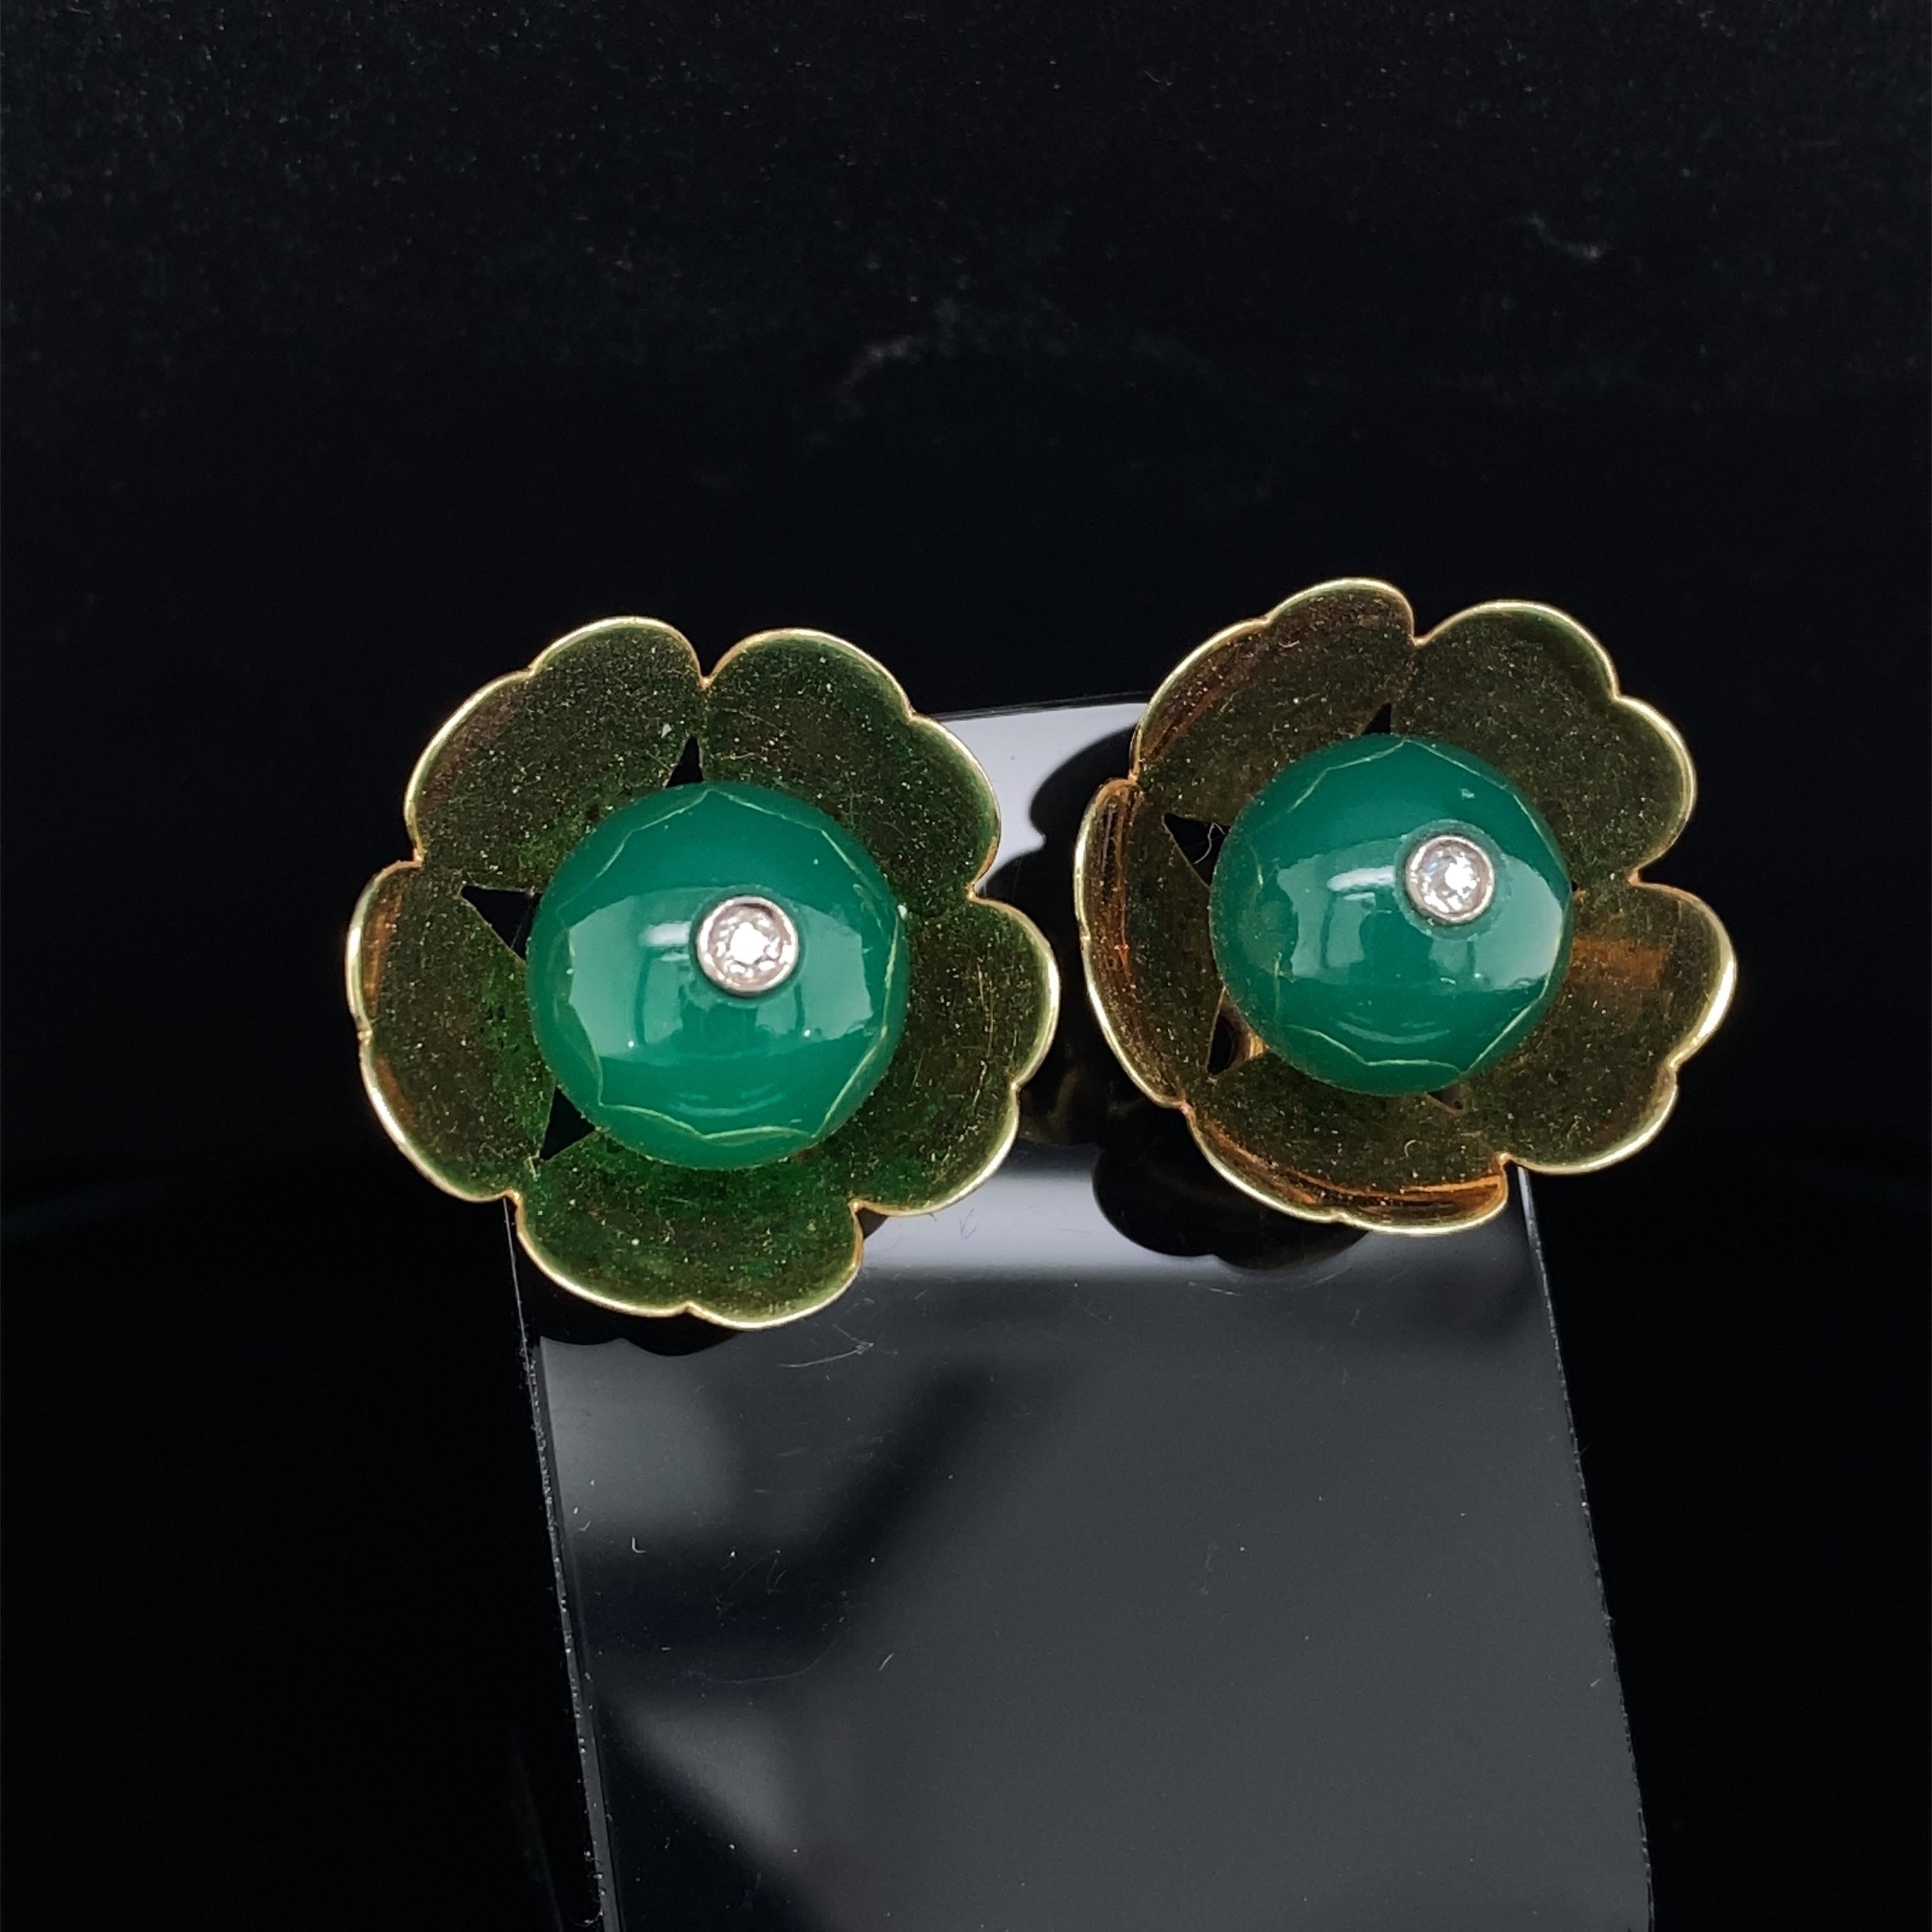 Cartier chrysophase and diamond floral earrings in 14 karat yellow gold.

These highly original and collectable vintage Cartier earrings are designed as flowers each set with a lively, round chrysophase bead dotted delicately in the centre with a